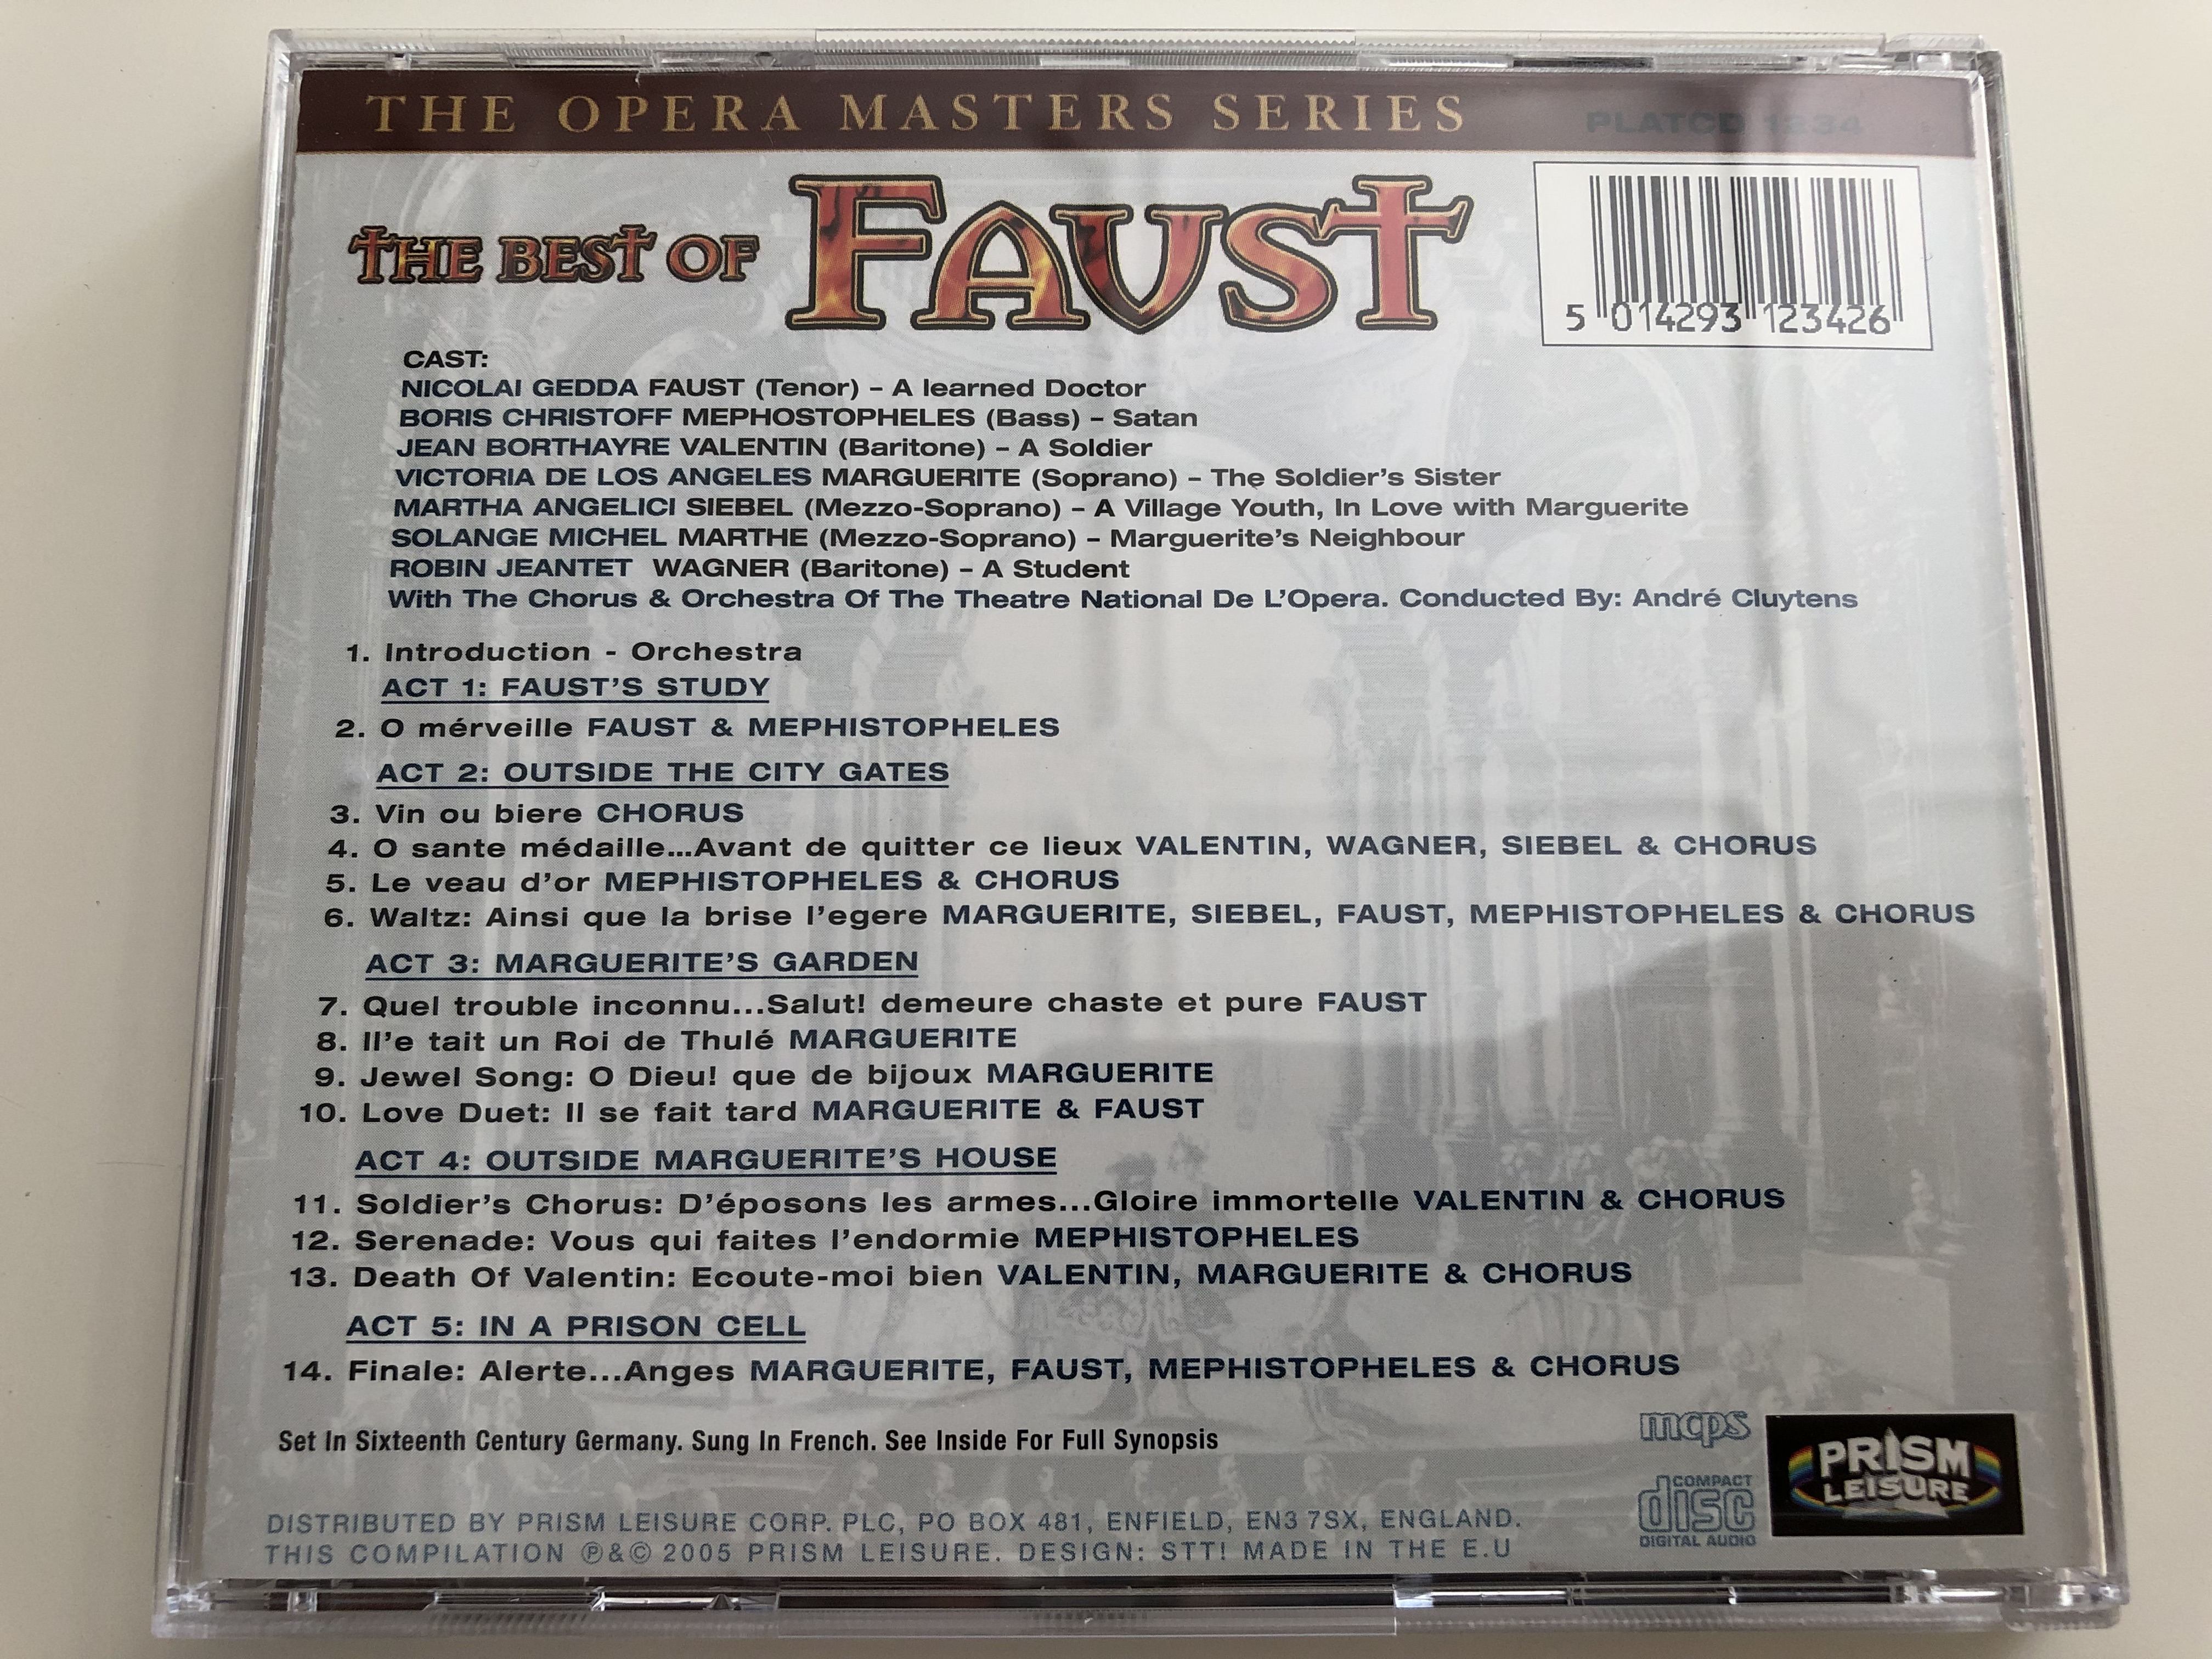 the-best-of-faust-by-gounod-original-recordings-featuring-victoria-de-los-angeles-and-boris-christoff-the-opera-masters-series-audio-cd-2005-platcd-1234-6-.jpg